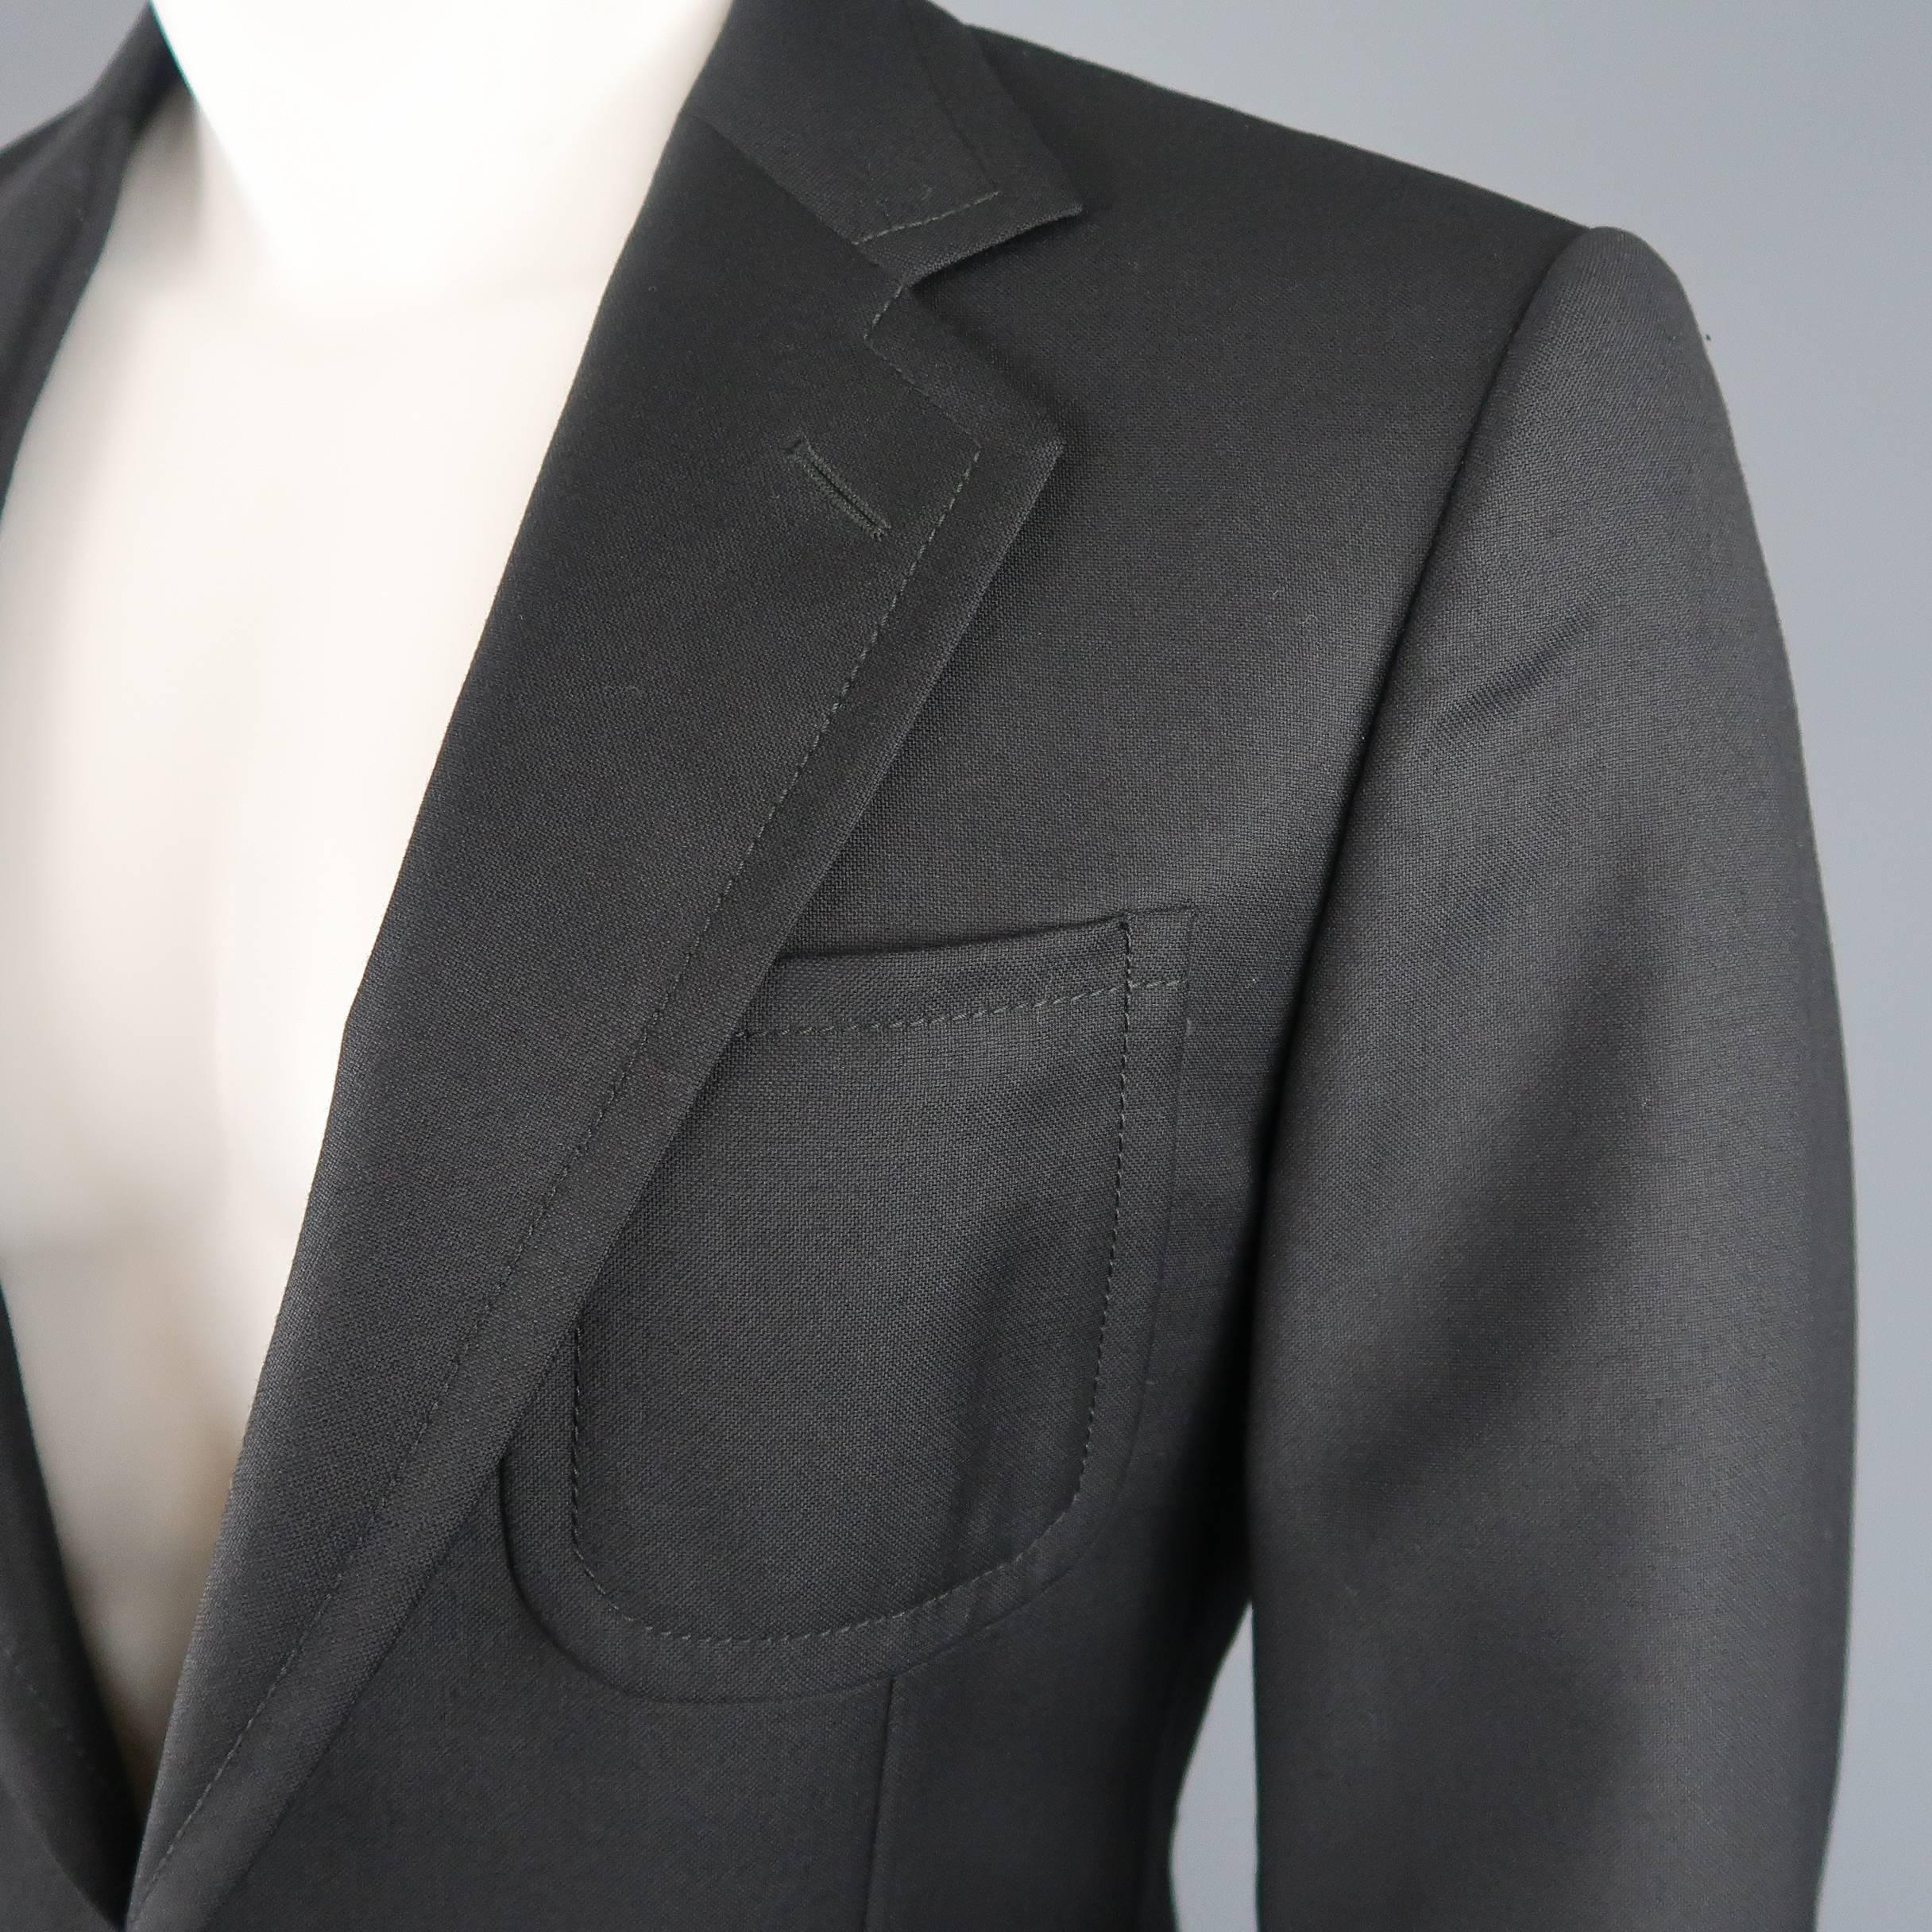 Single breasted Gucci sport coat comes in black wool with a notch lapel patch pockets, and gold tone GG buttons. Made in Switzerland.
 
New with Tags.
Marked: IT 46 R
 
Measurements:
 
Shoulder: 17 in.
Chest: 40 in.
Sleeve: 24 in.
Length: 32 in.
